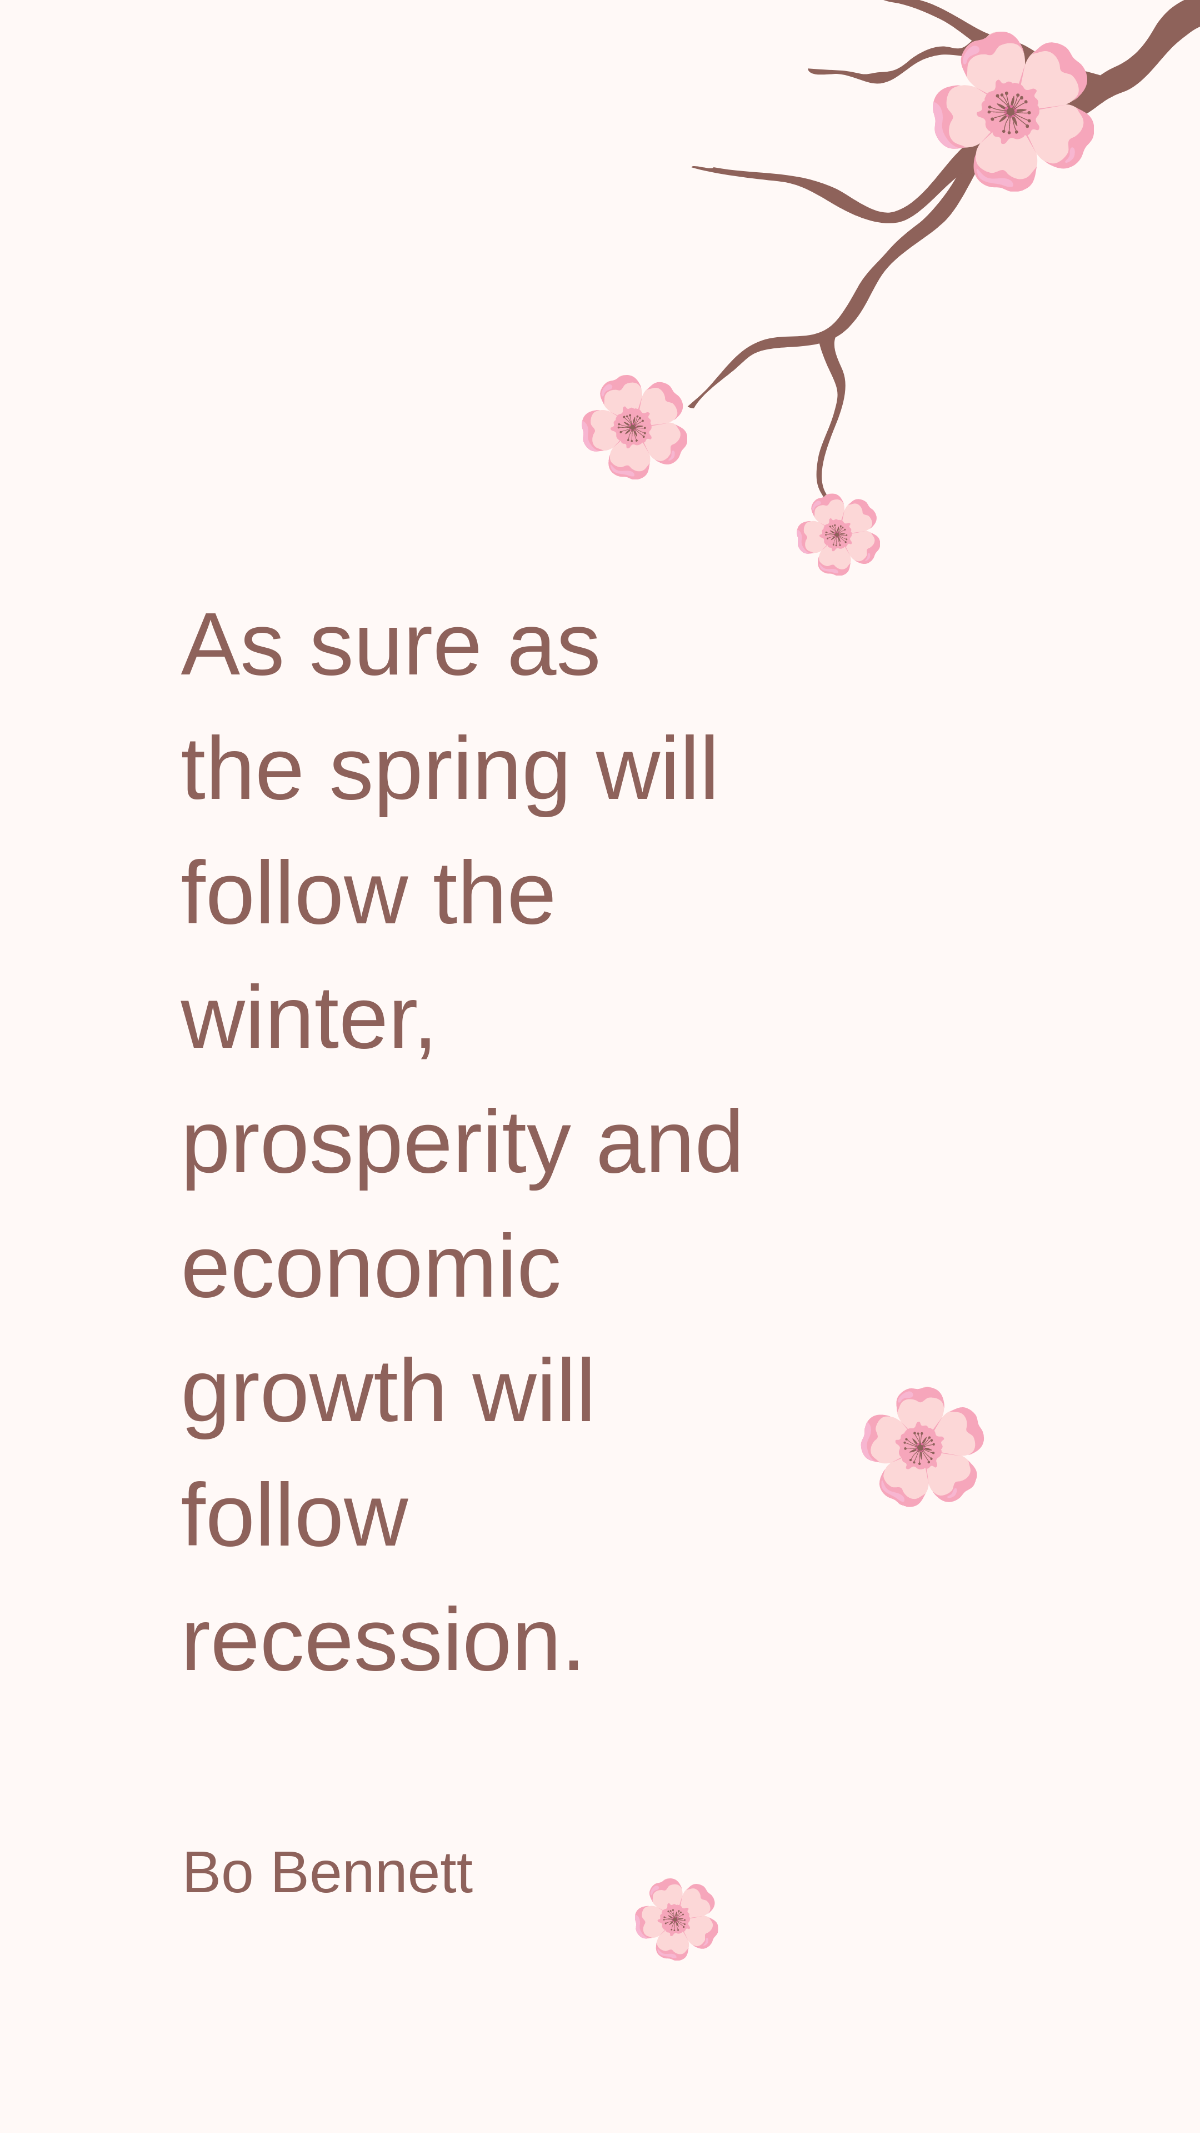 Bo Bennett - As sure as the spring will follow the winter, prosperity and economic growth will follow recession.